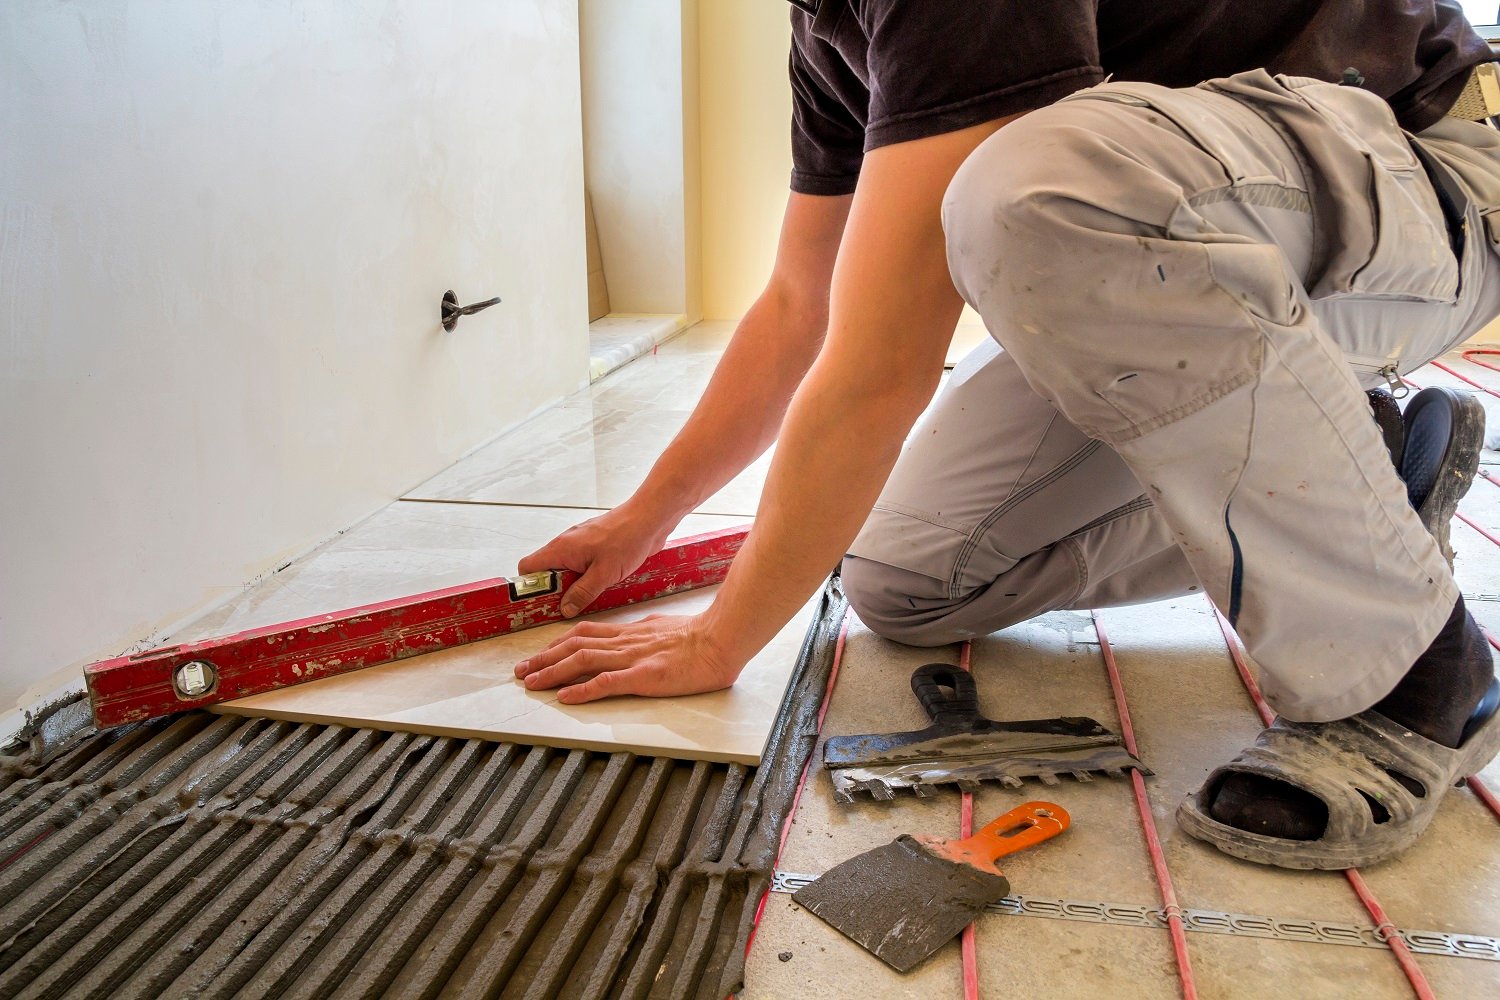 Young worker tiler installing ceramic tiles using lever on cement floor with heating red electrical cable wire system. Home improvement, renovation and construction, comfortable warm ،me concept.